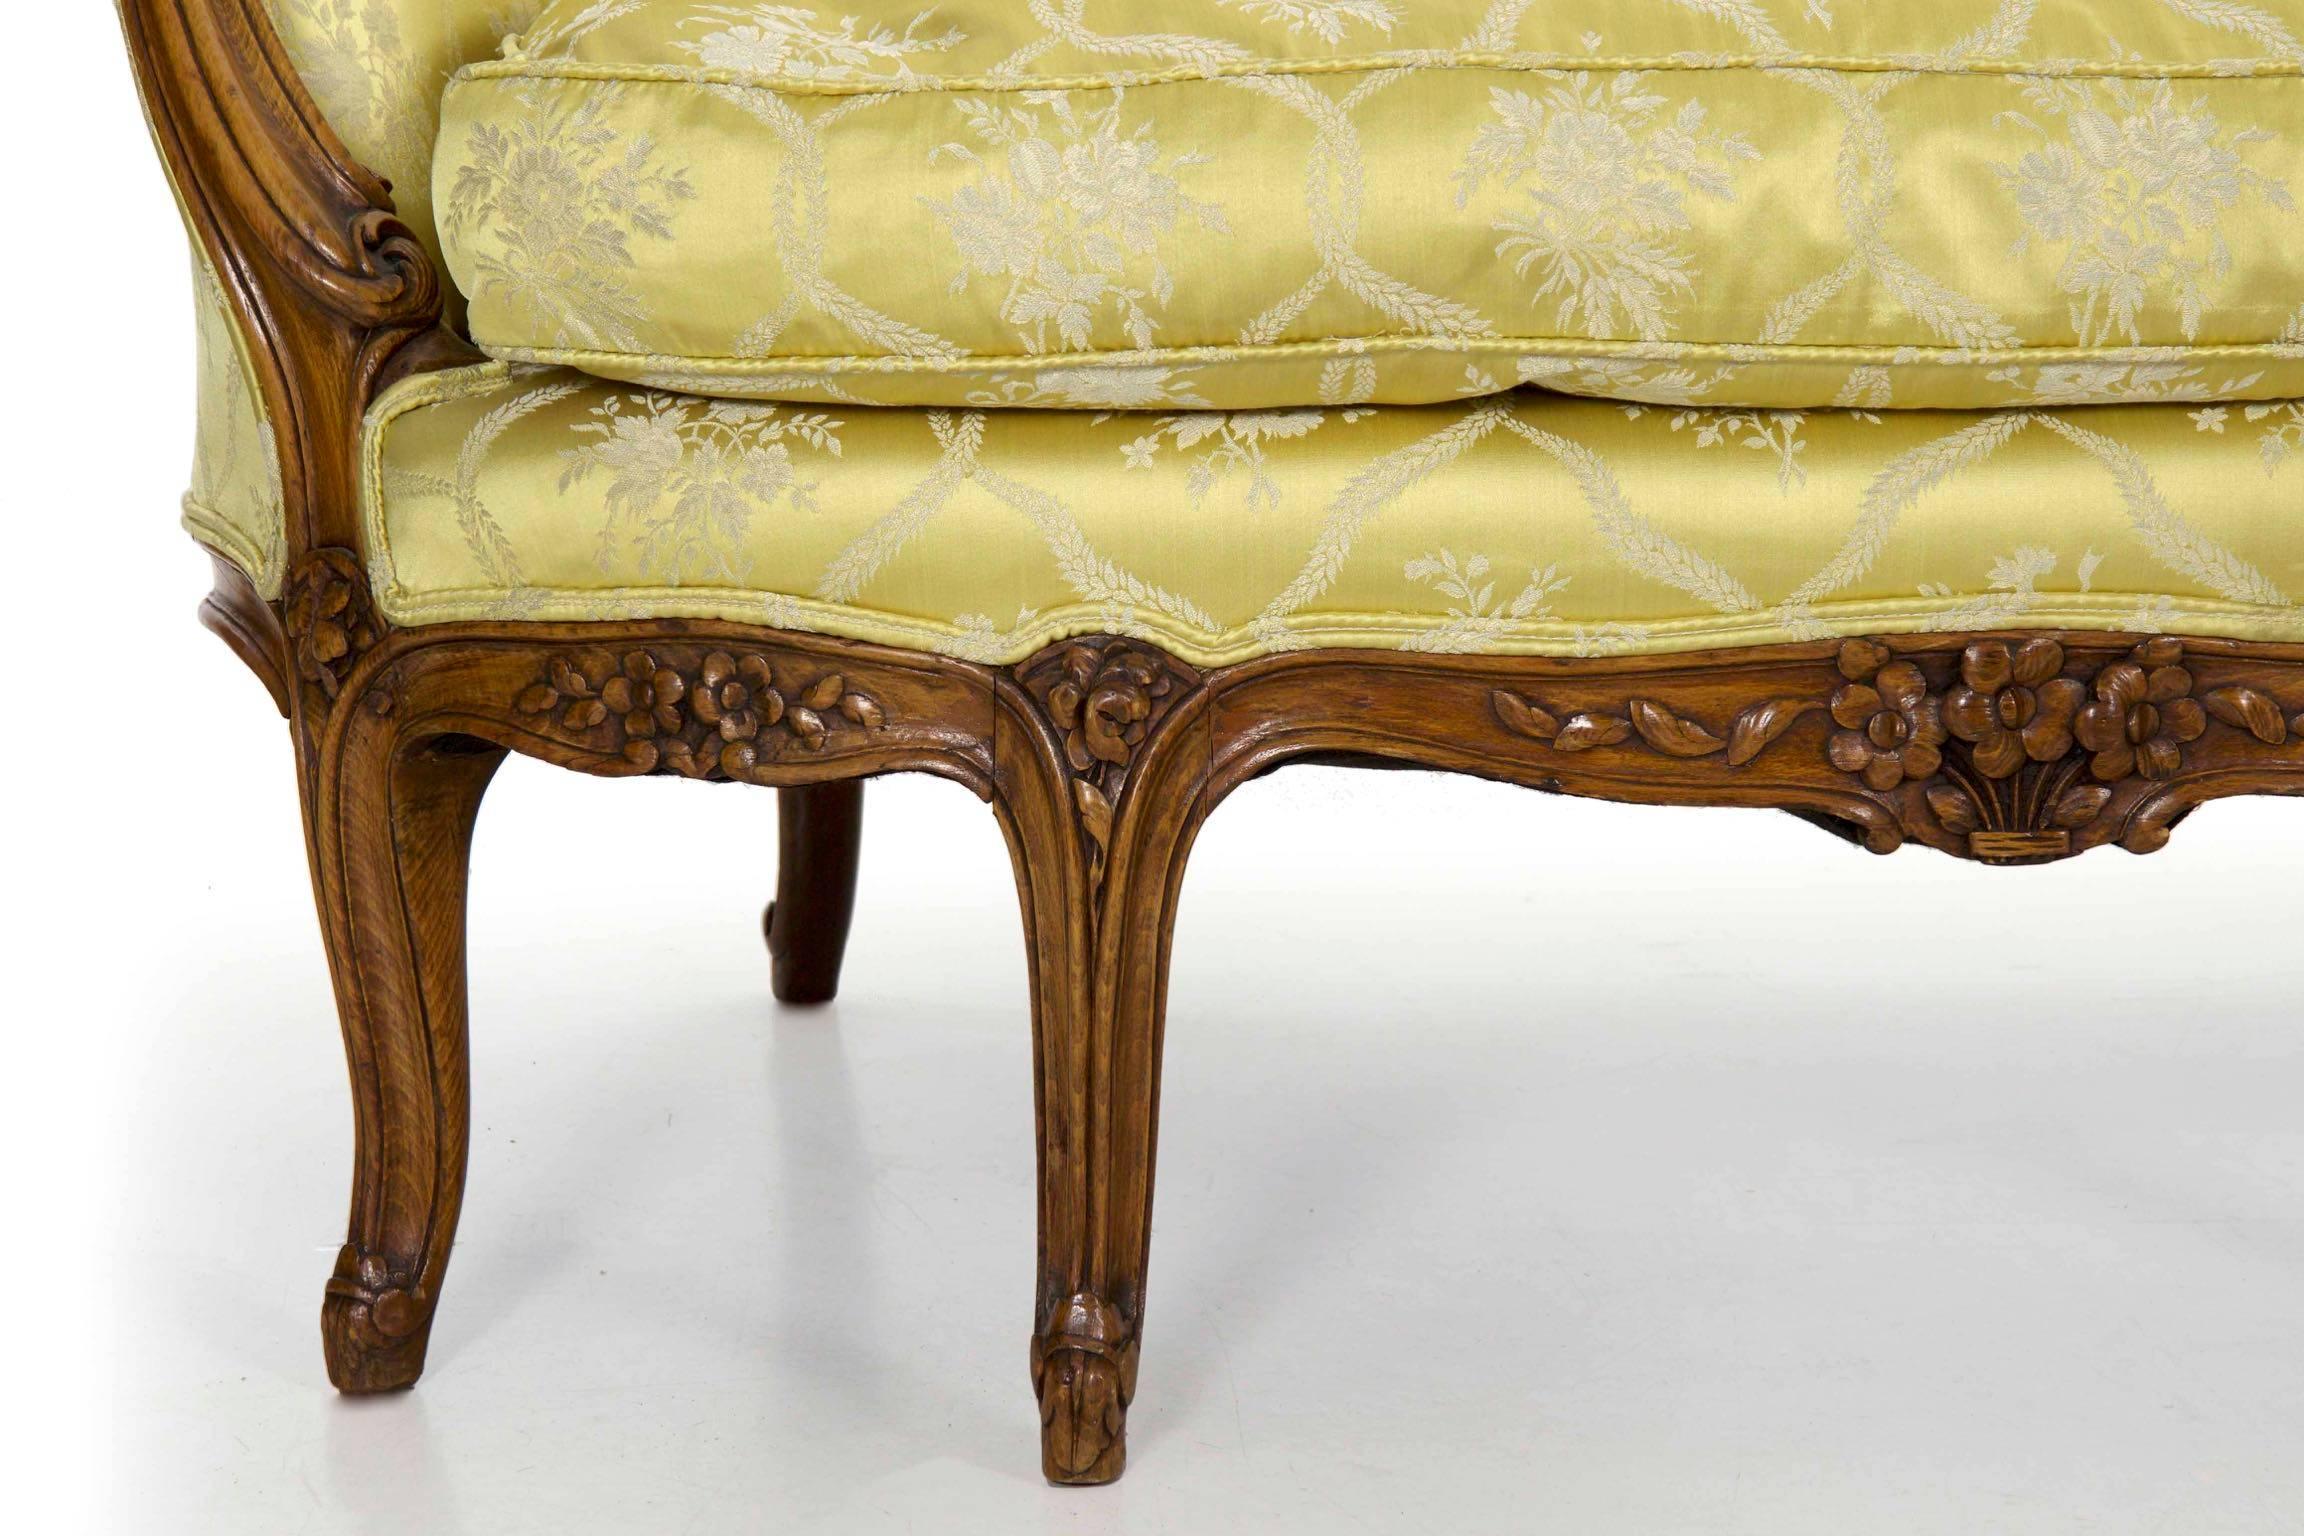 19th Century French Louis XV Style Antique Canapé Sofa Settee 1